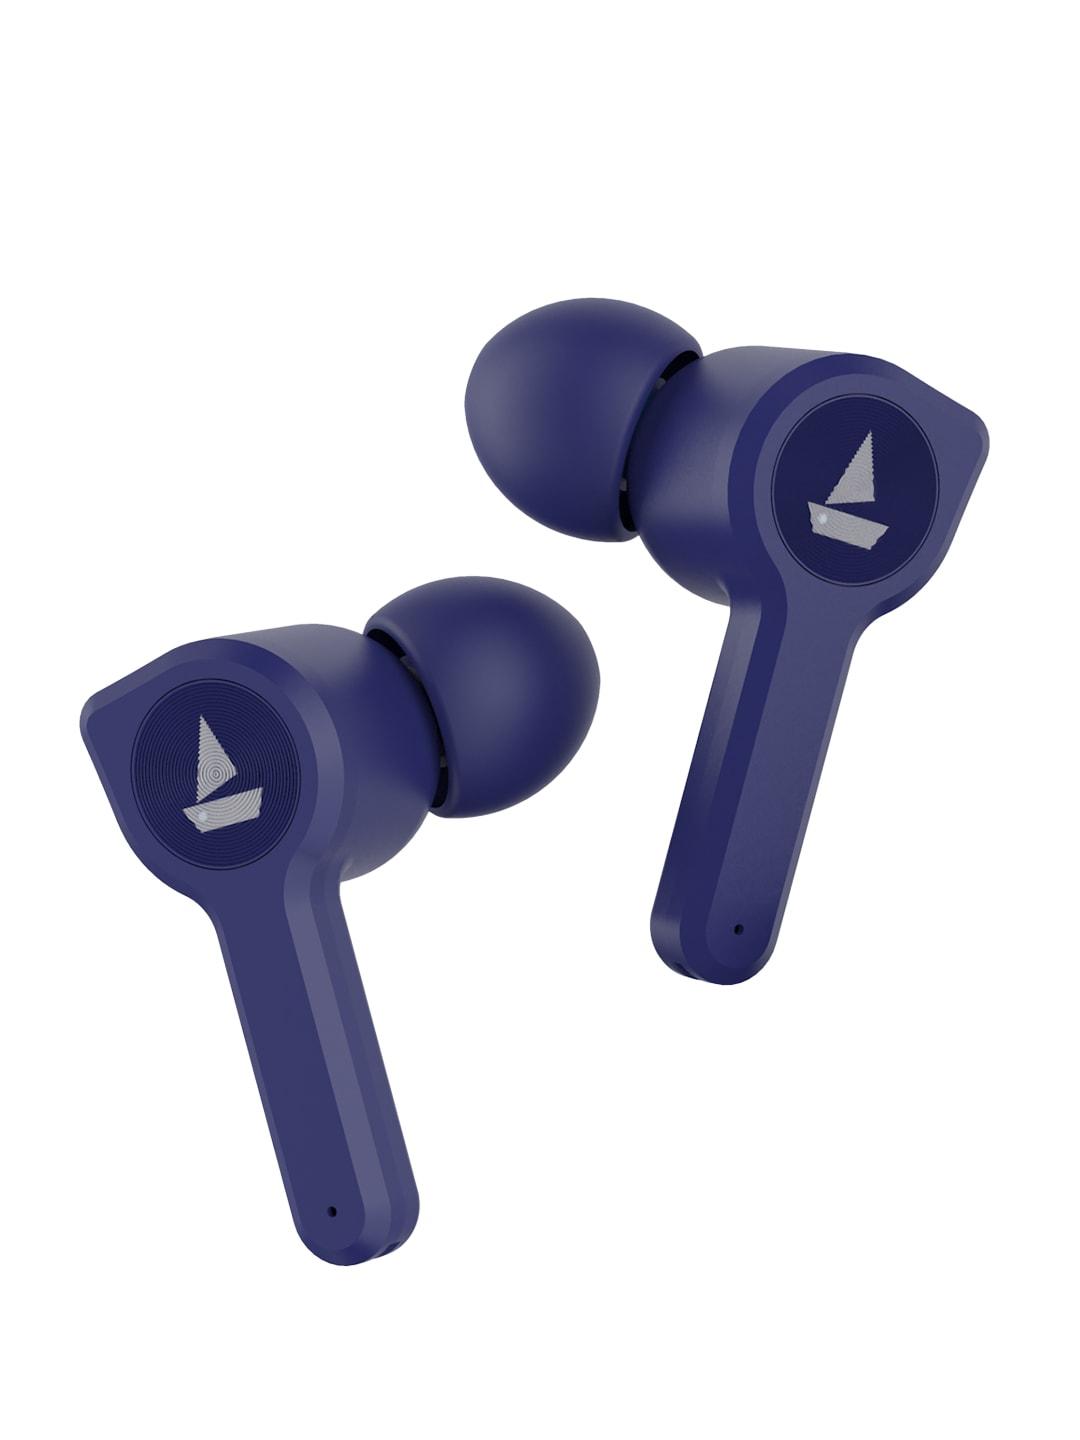 boat airdopes 402 m tws bold blue earbuds with touch controls immersive audio